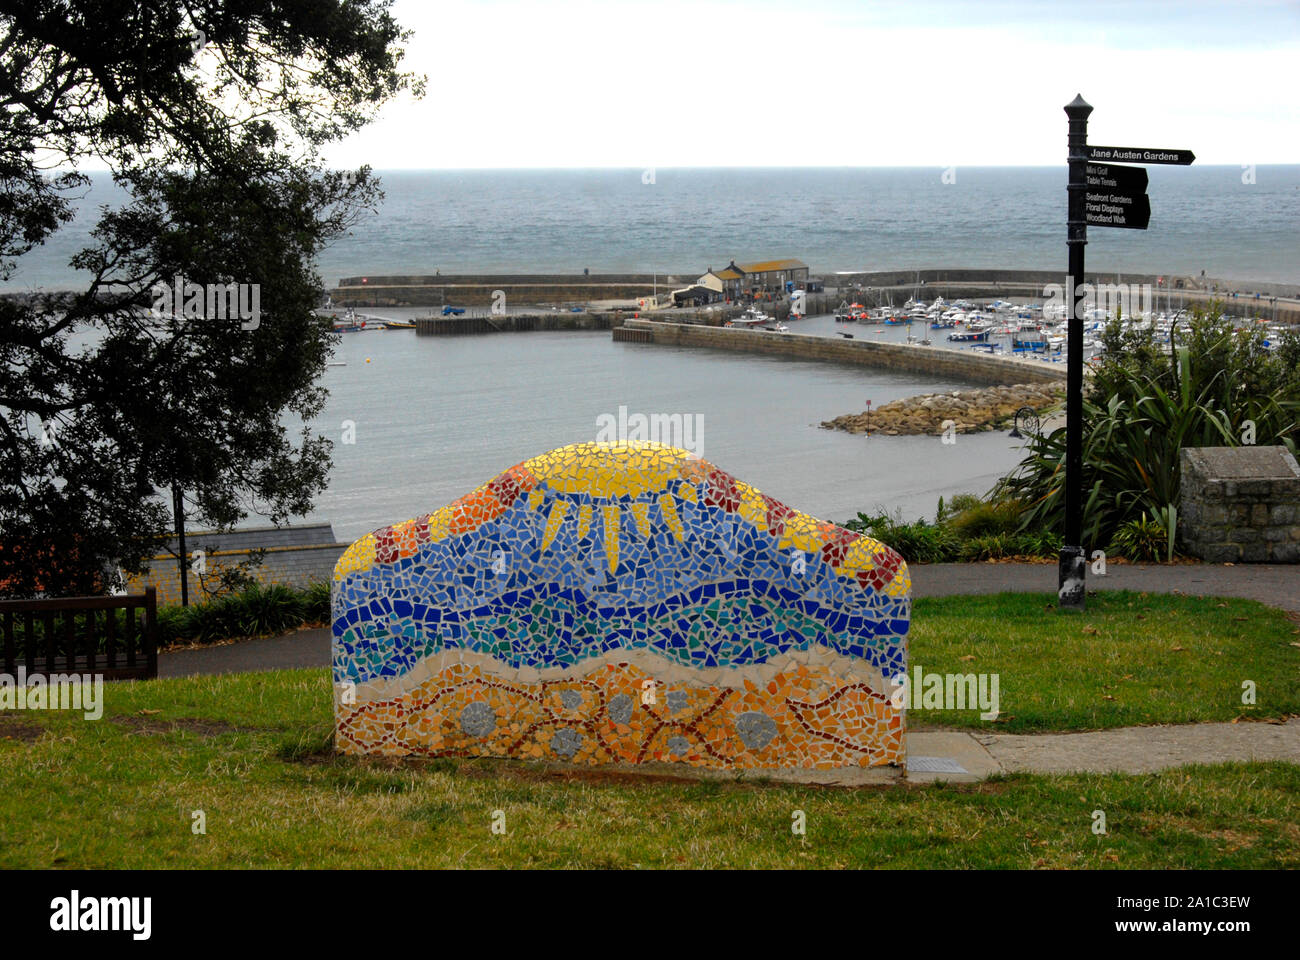 Colouful ceramic seat on hill overlooking Lyme Regis bay, Dorset, England, on an overcast day Stock Photo